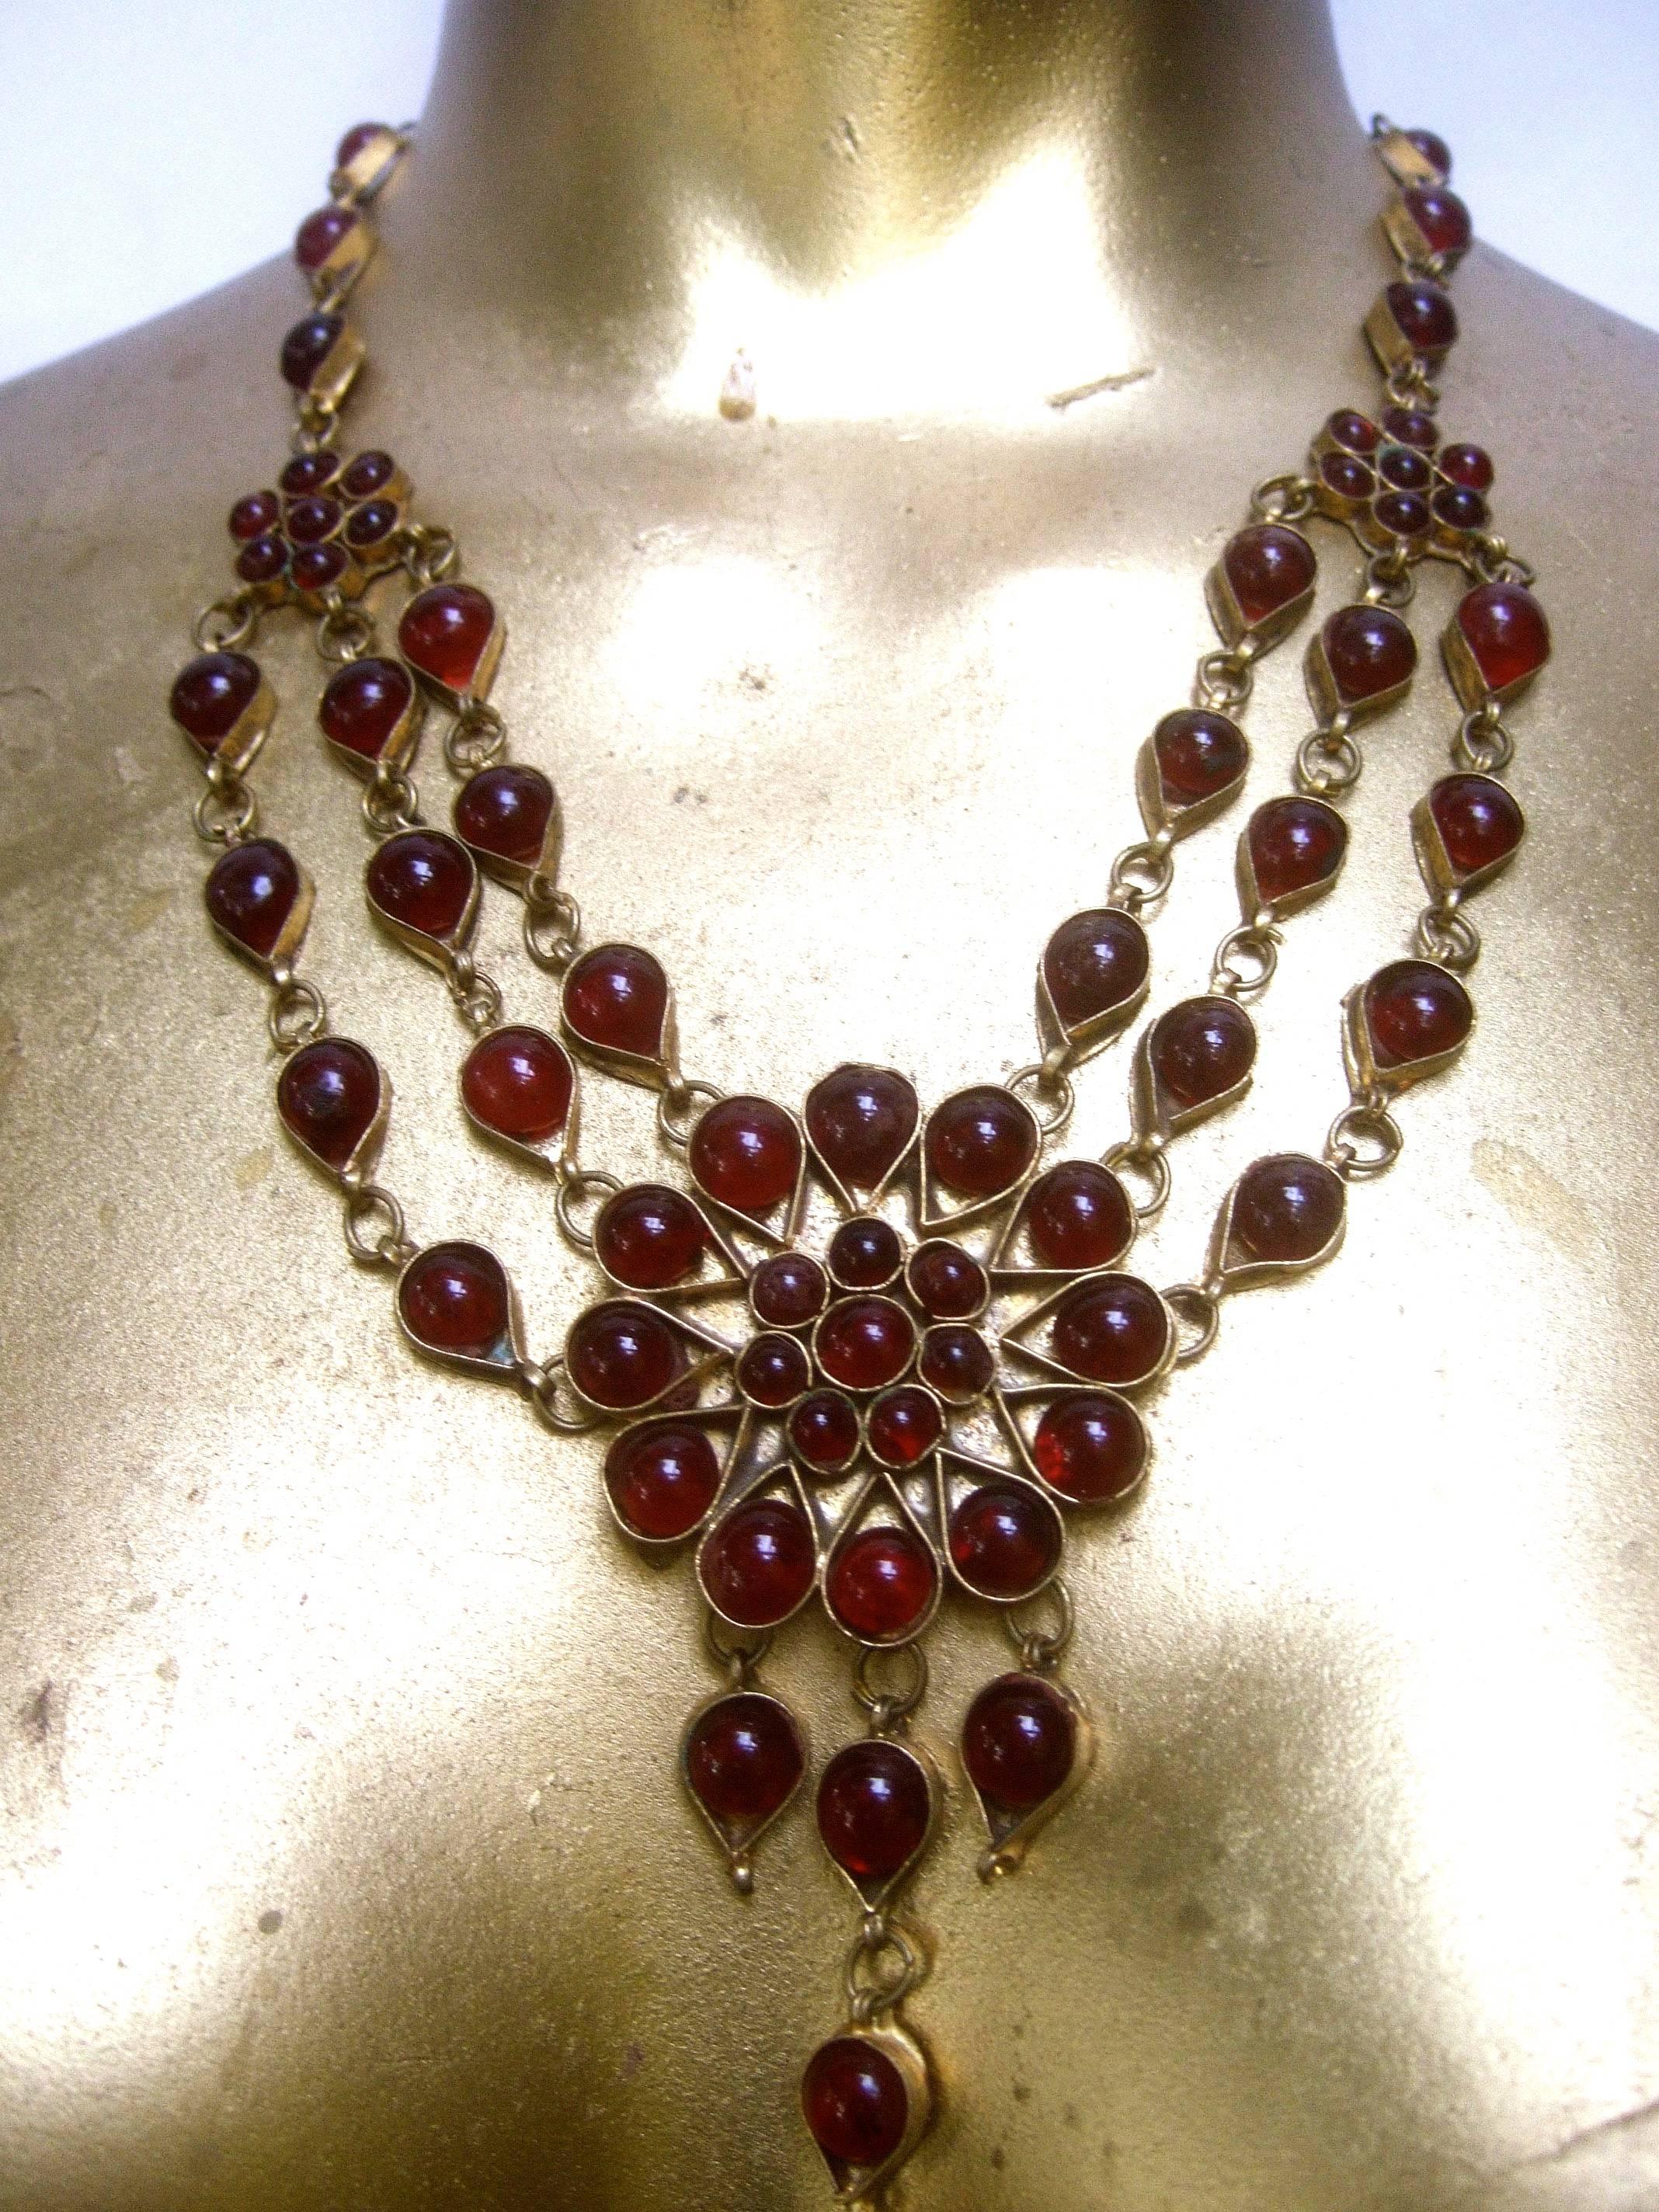 Exotic cranberry glass cabochon choker necklace 1980s
The ethnic artisan necklace is embellished with clusters
of deep red glass stones

The center circular medallion is designed with three
rows of dangling glass settings. The sides transition
into